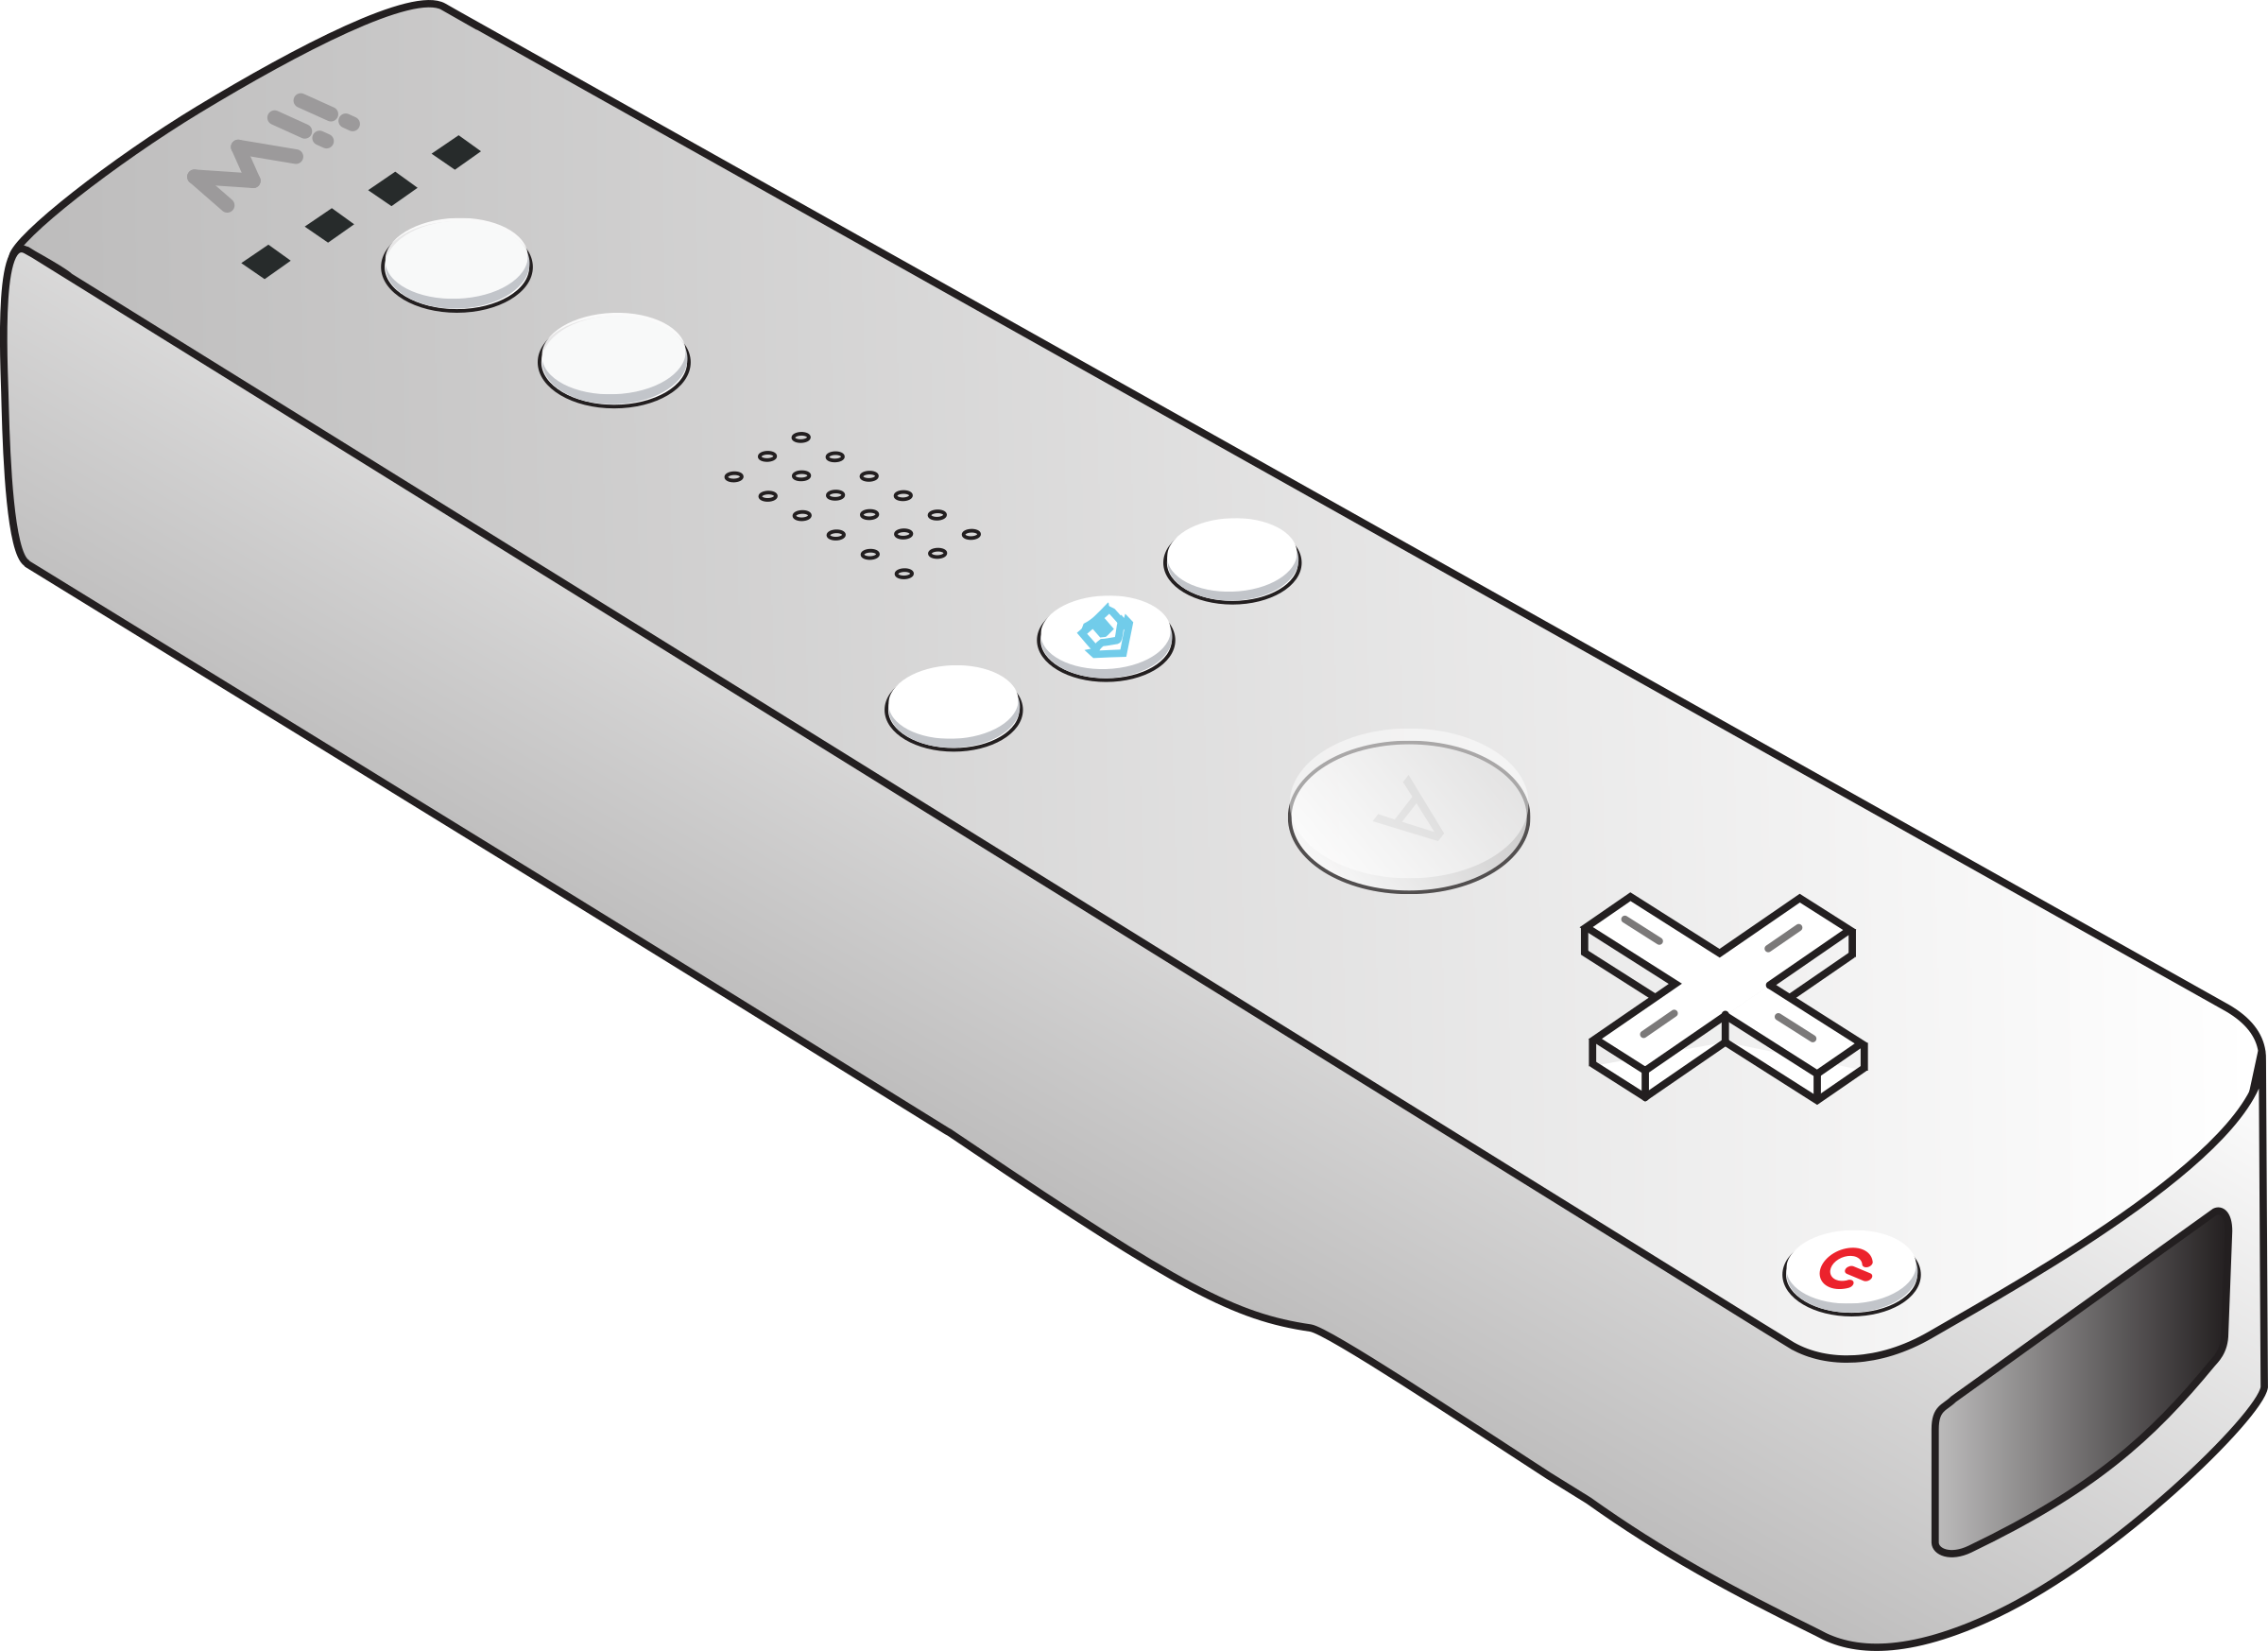 Wiimote big image png. Controller clipart vector